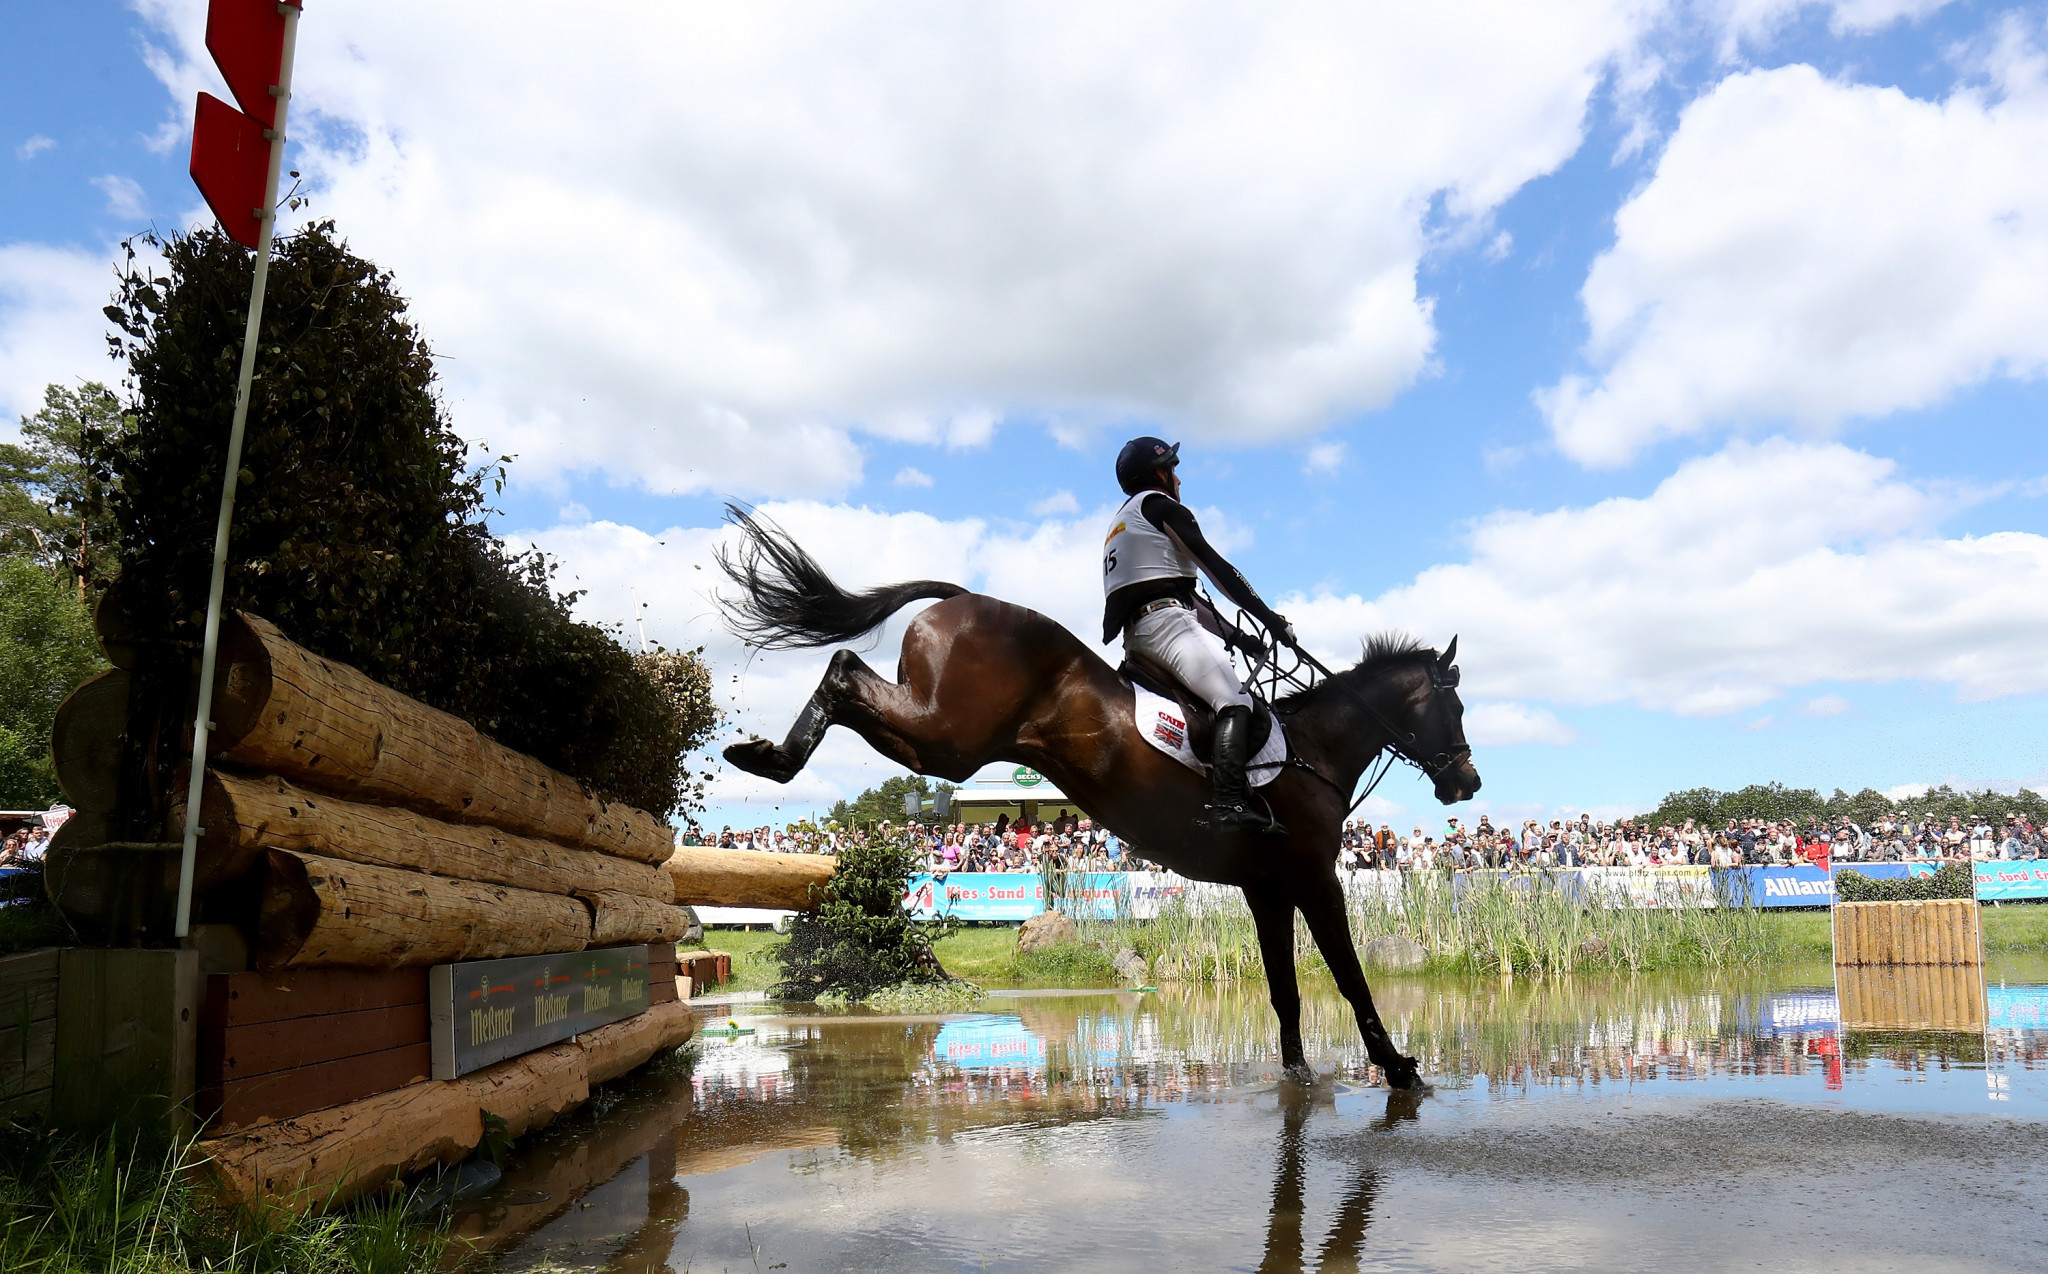 Oliver Townend is the new Burghley Horse Trials leader ©Getty Images